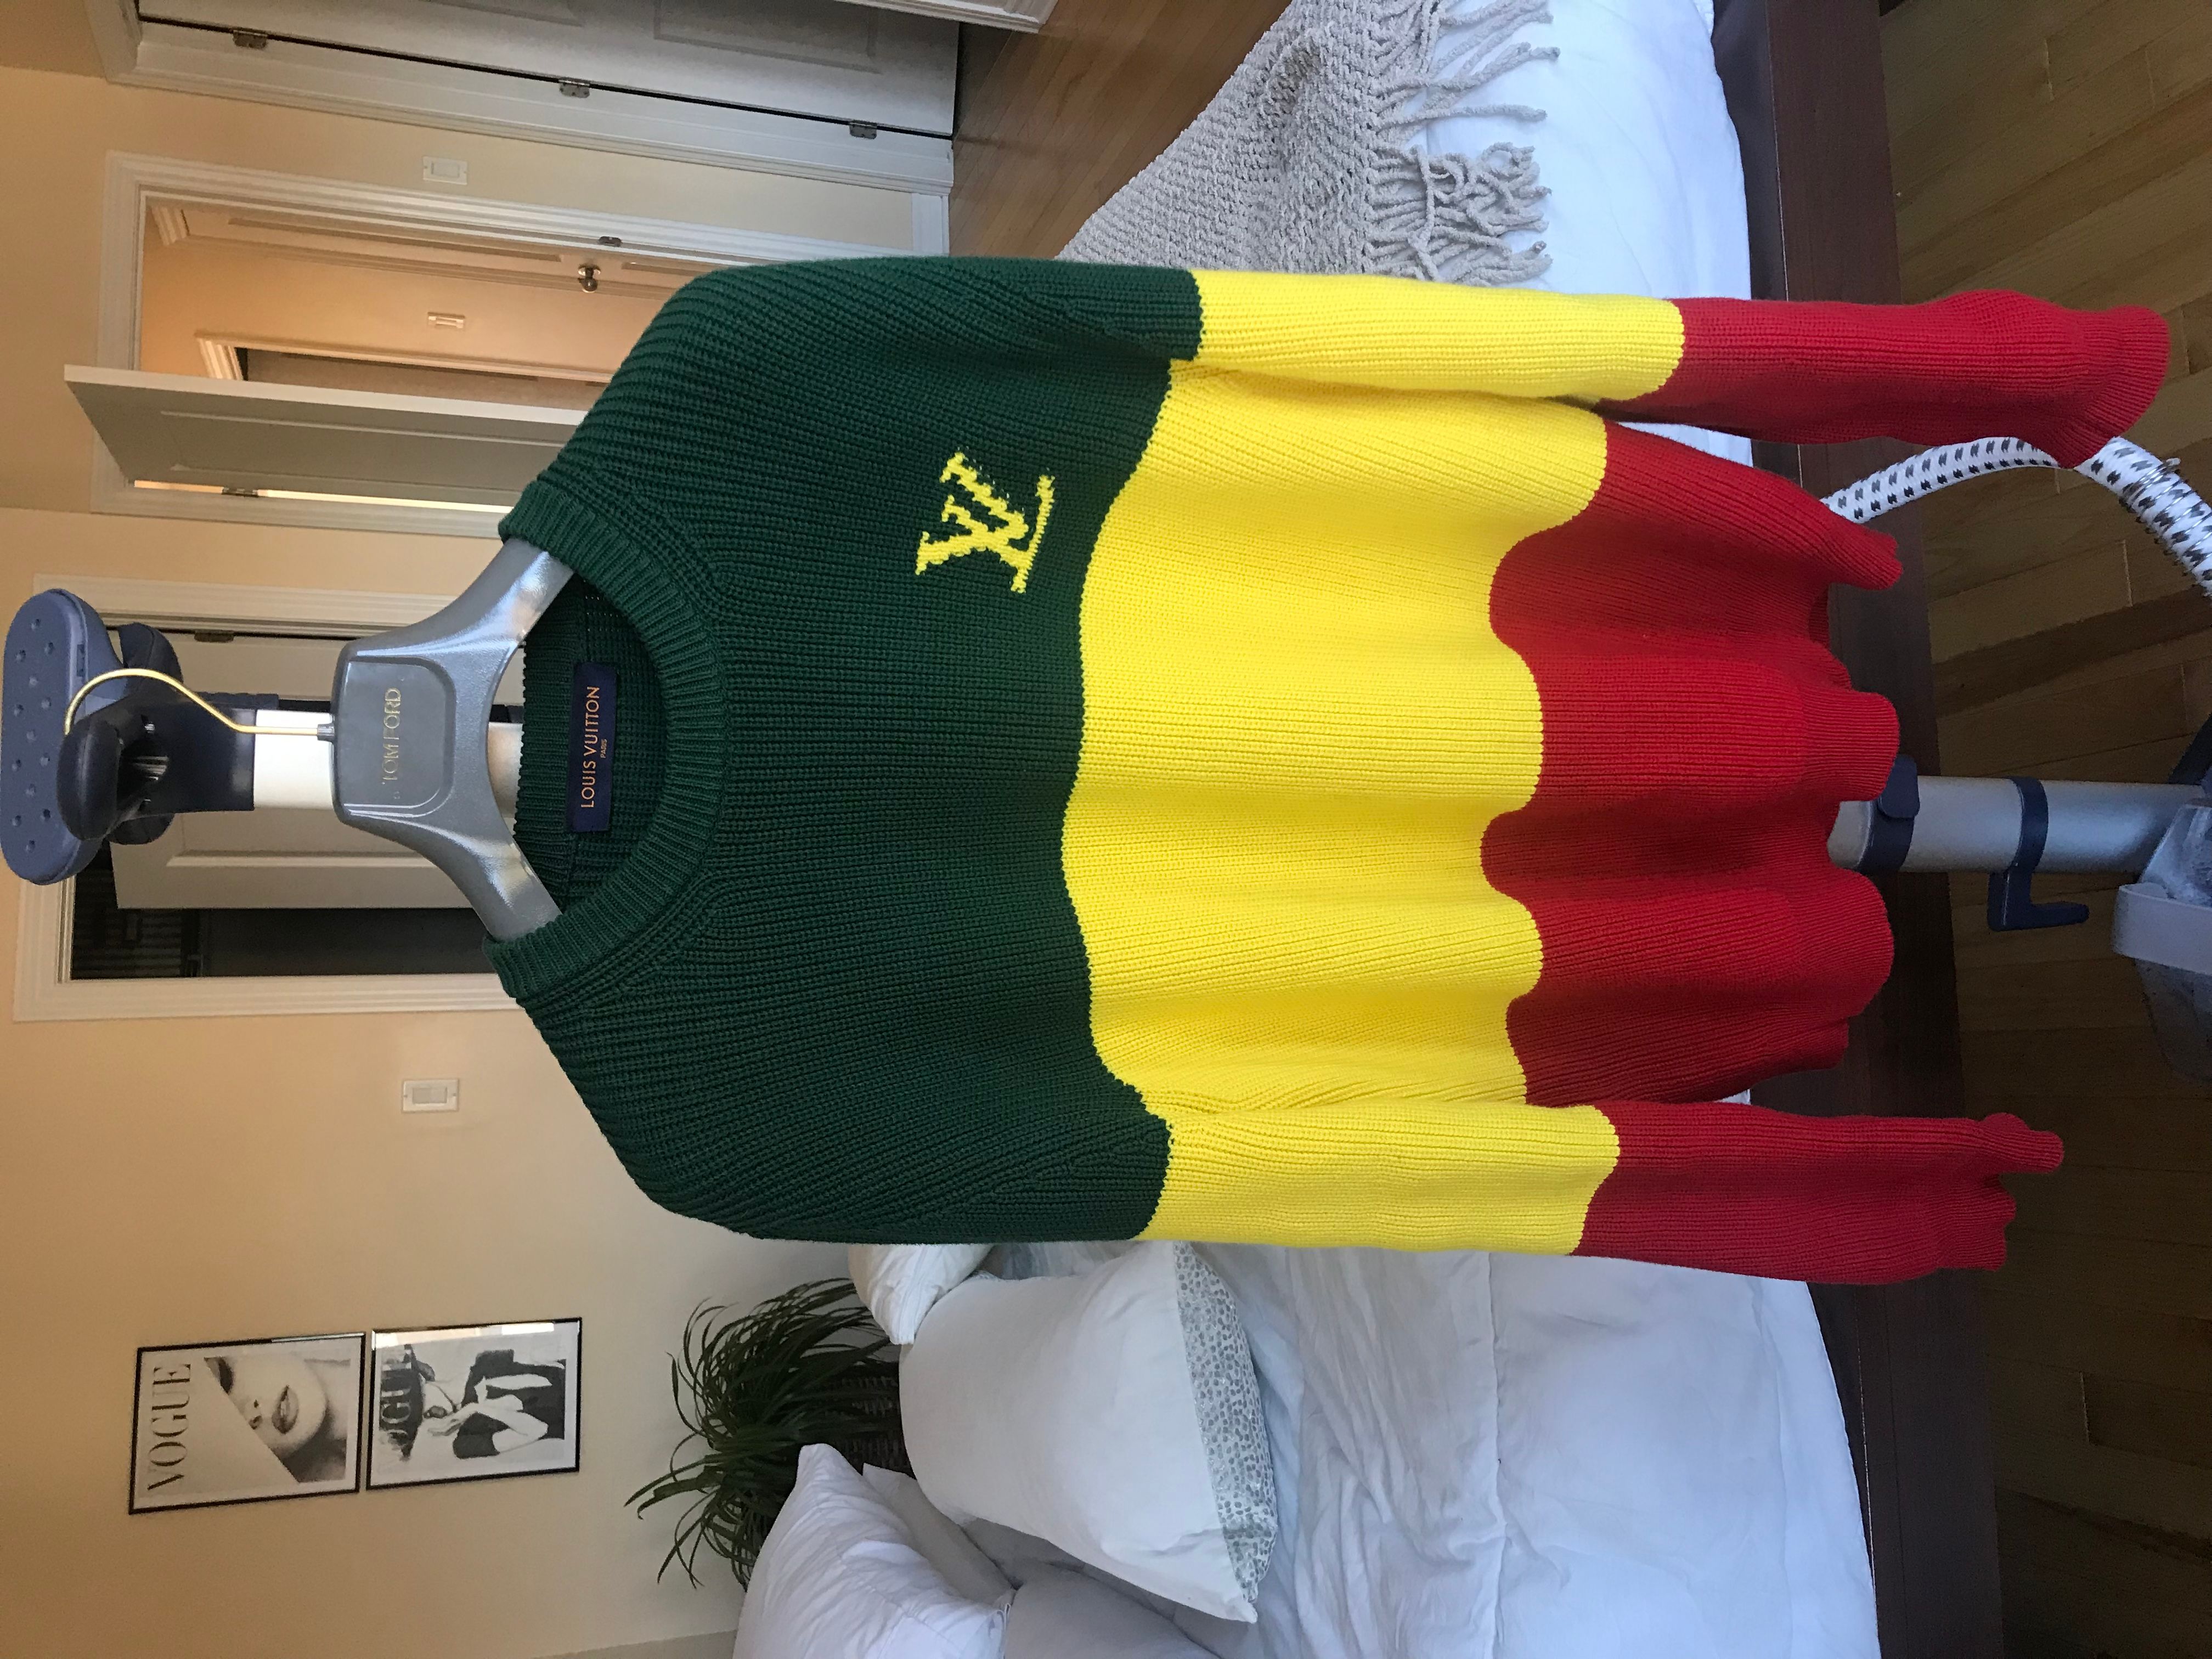 Louis Vuitton's Sweater Based on Jamaica's Flag Has the Wrong Colors.